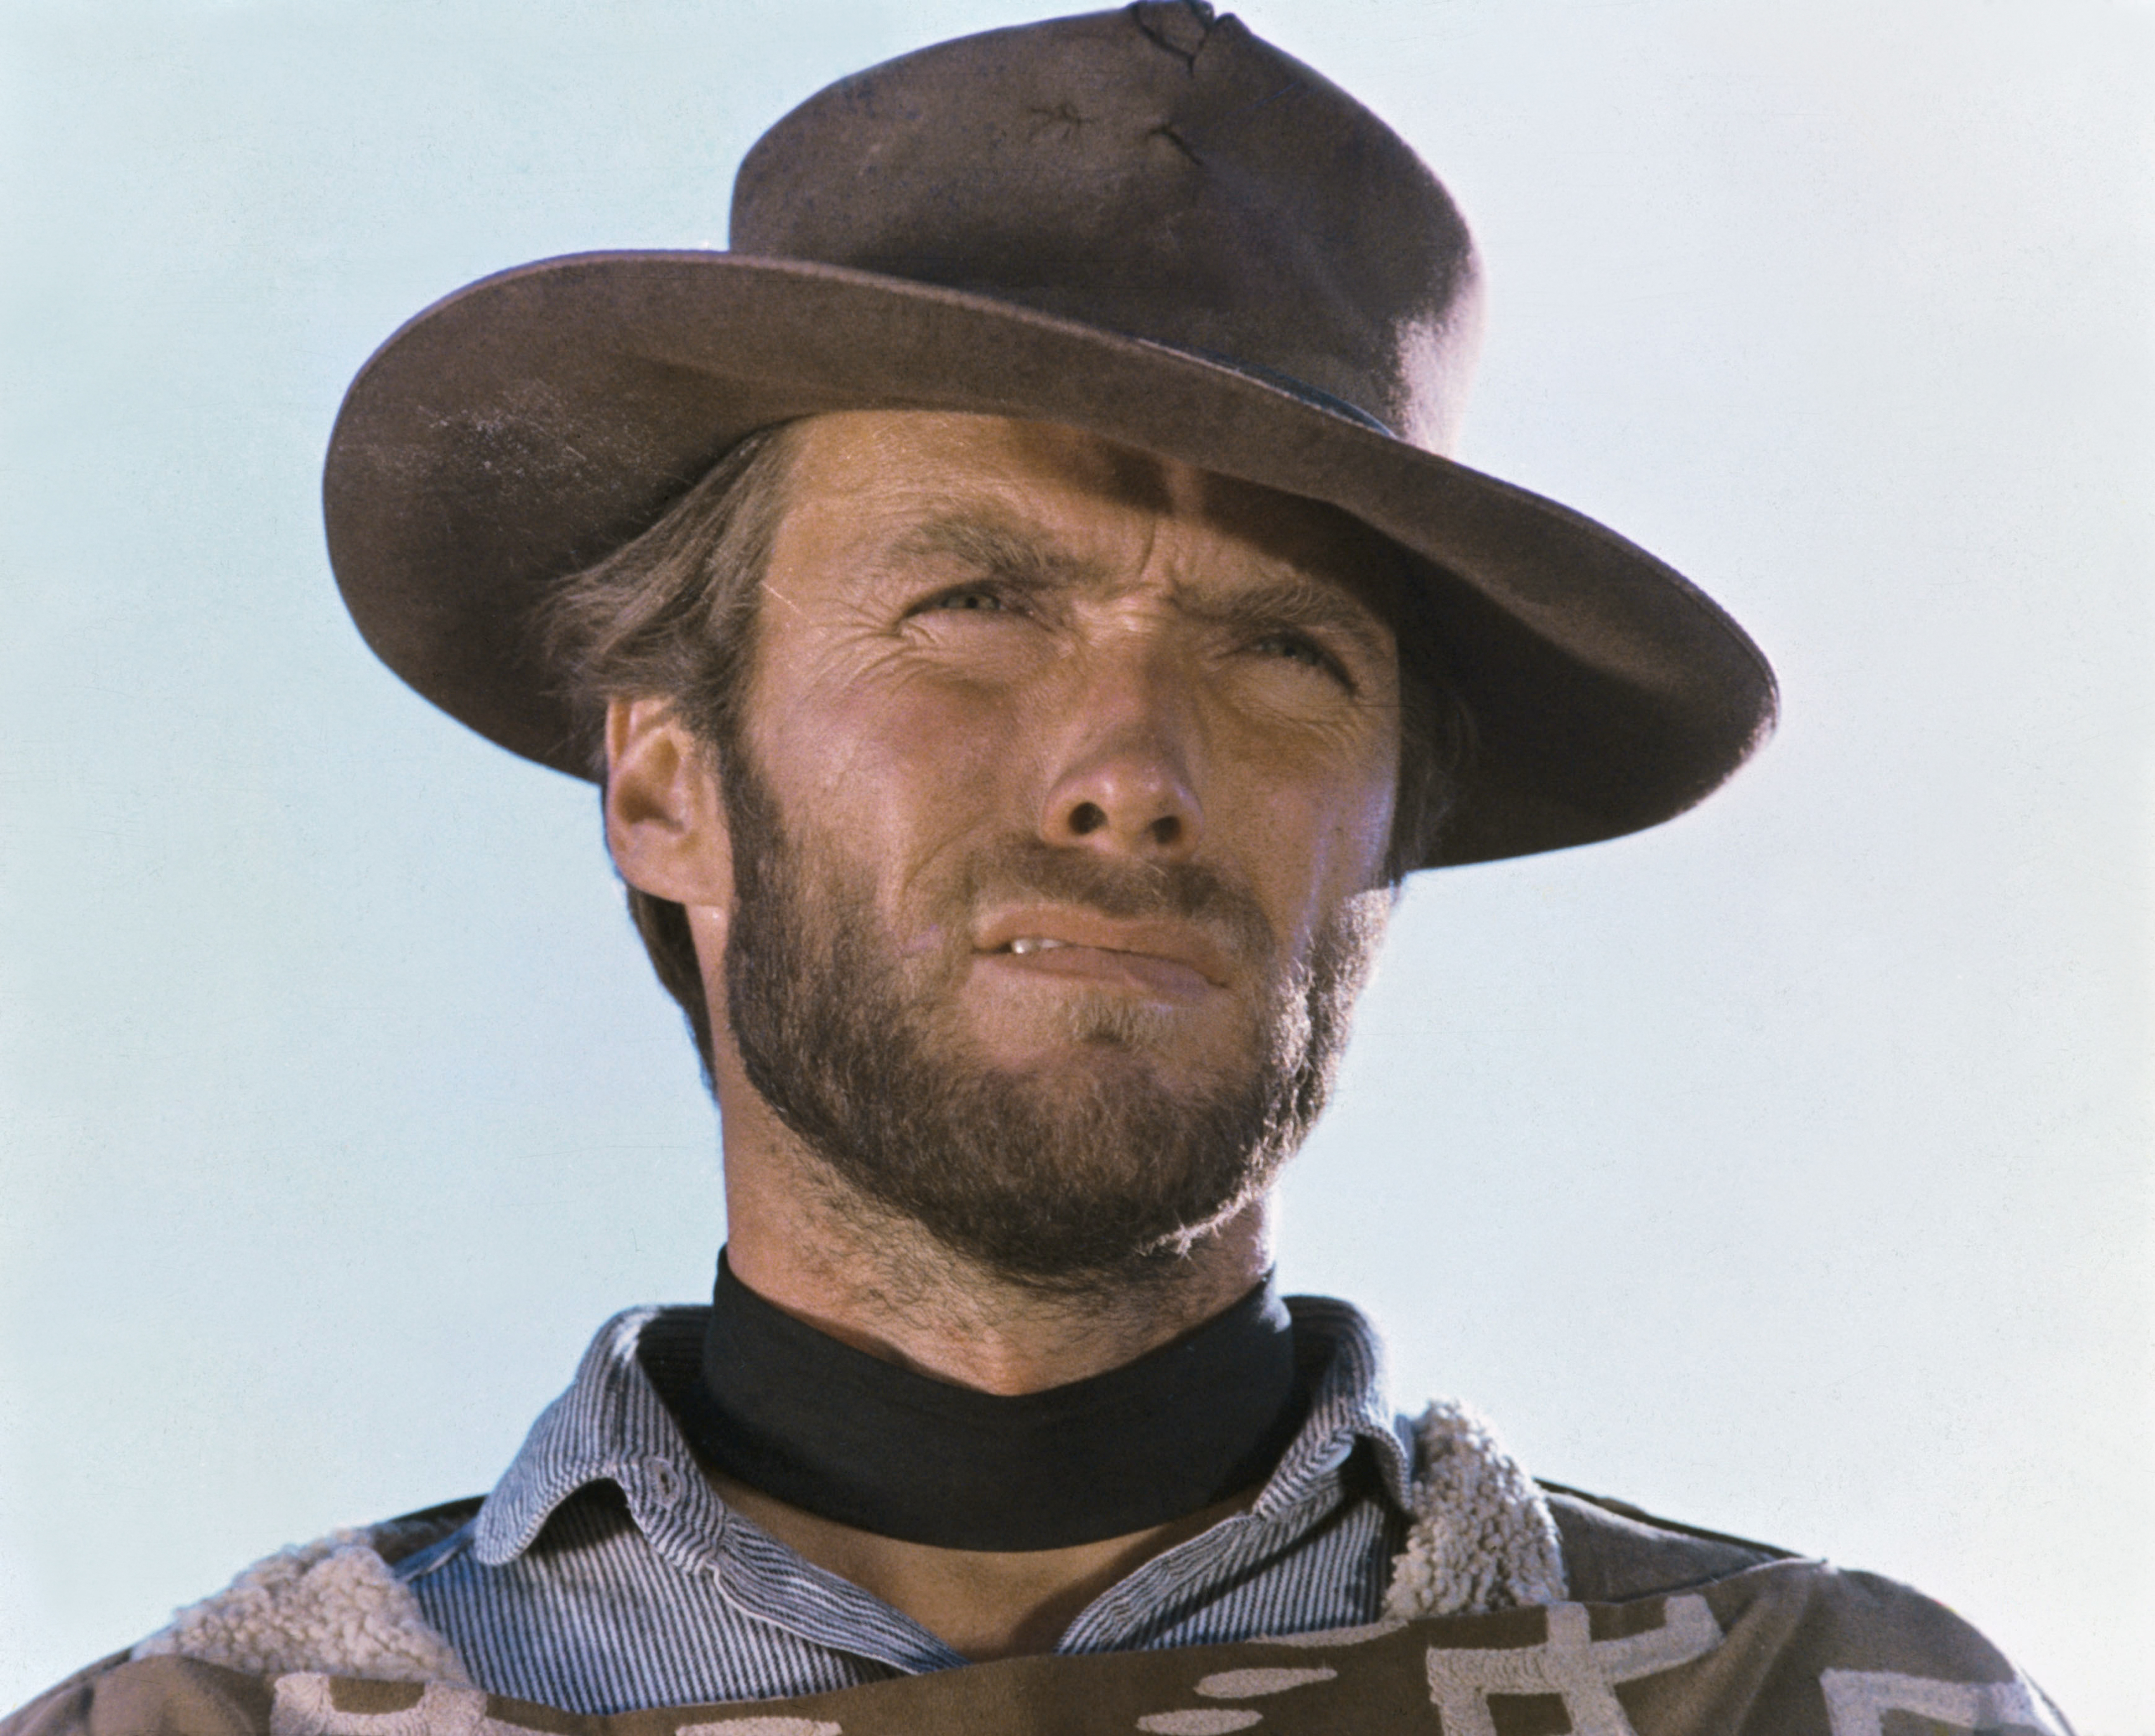 Clint Eastwood on the set of 'The Good, The Bad and The Ugly' in 1966 | Source: Getty Images